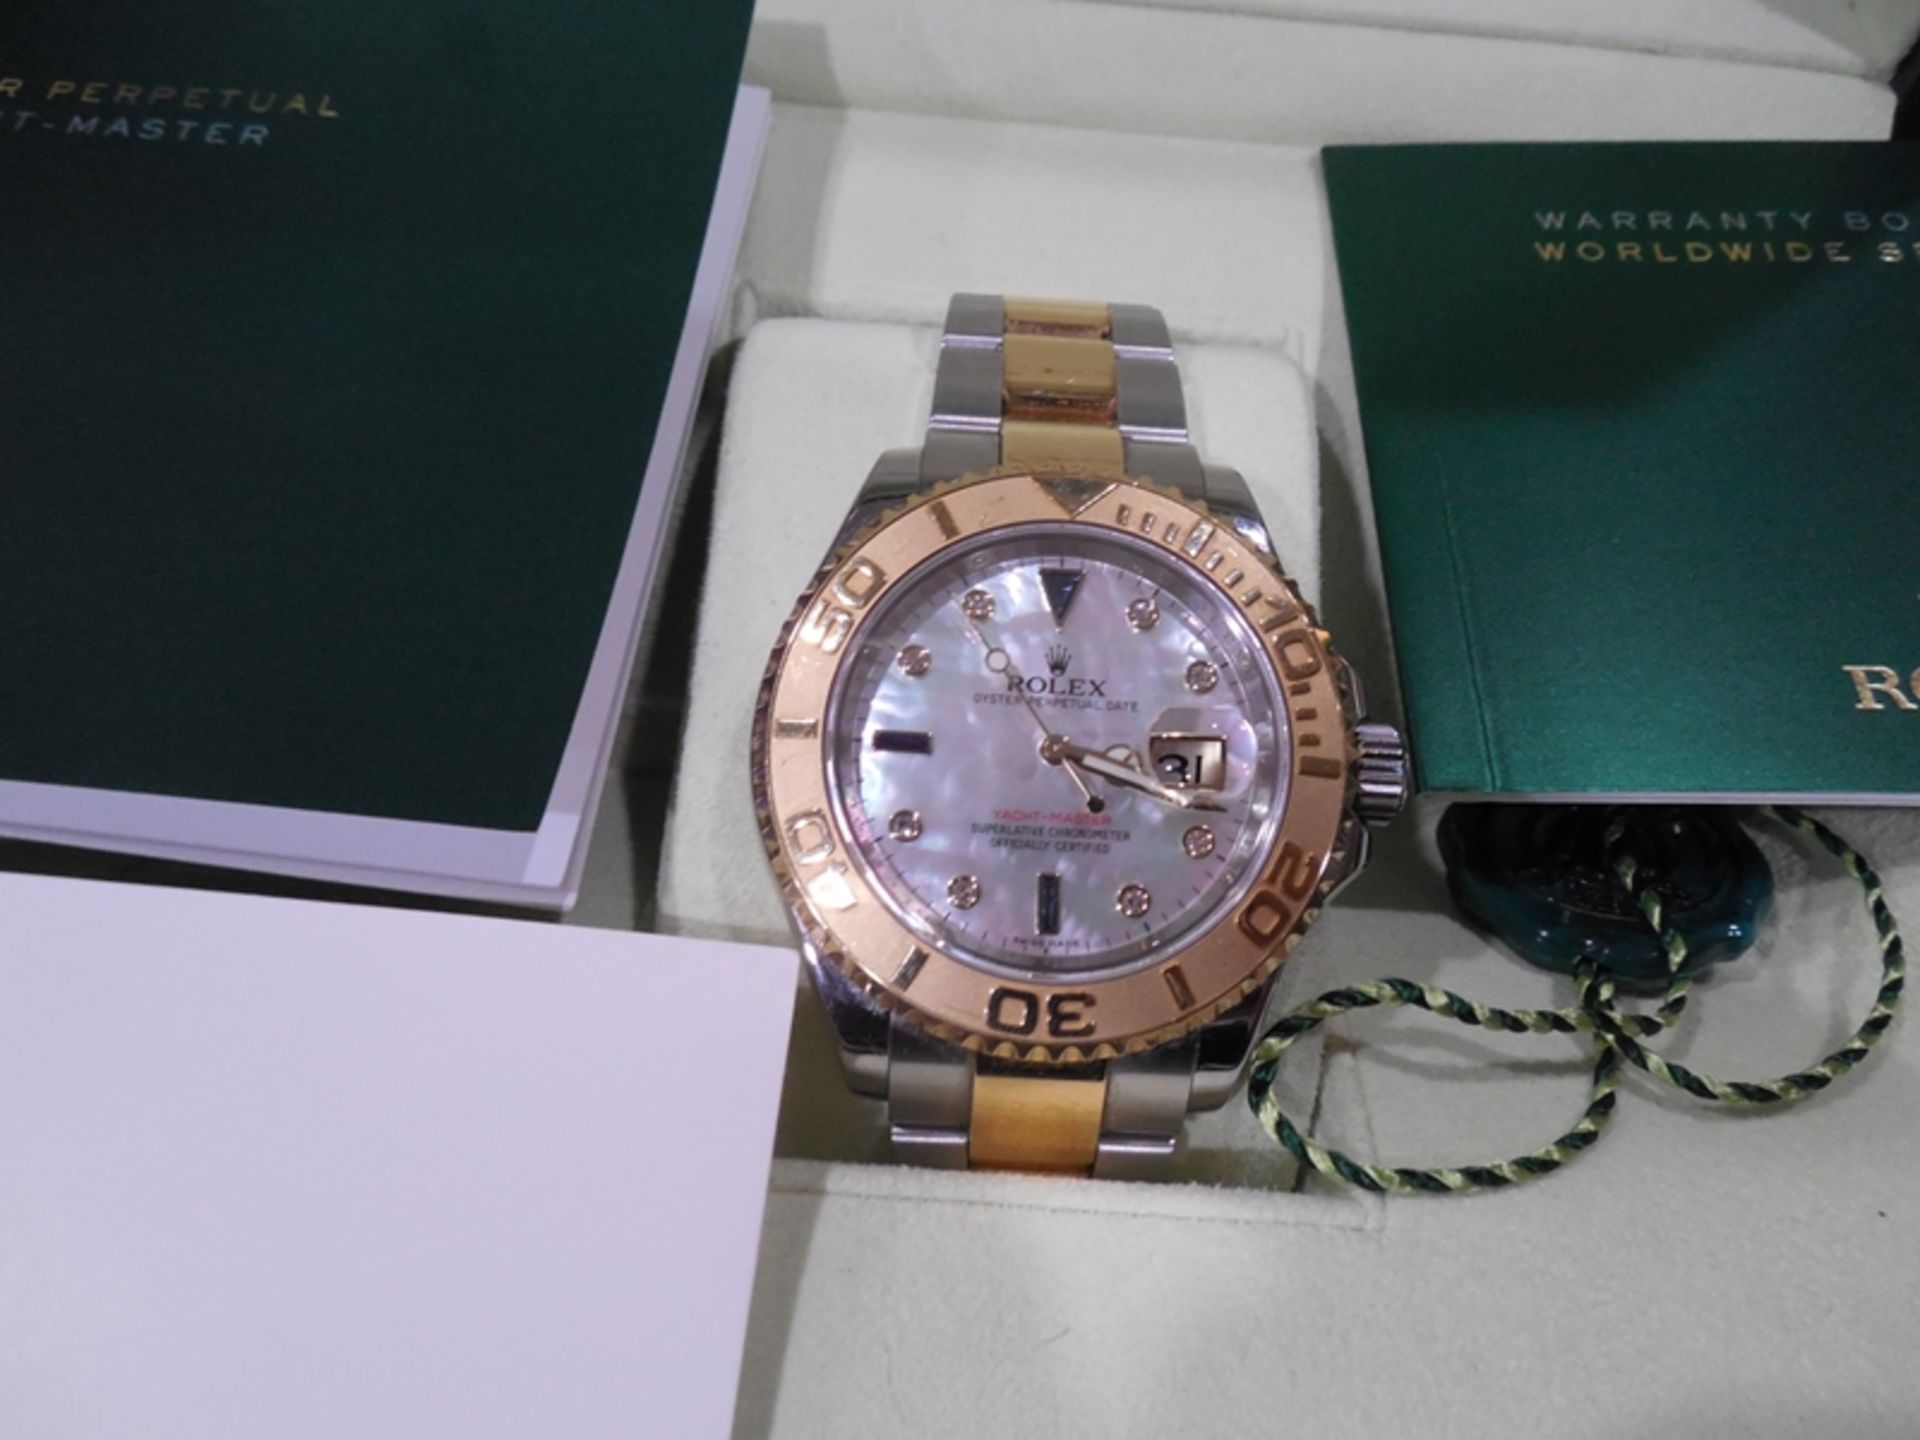 ROLEX YACHTMASTER Oyster Perpetual 18k with white sapphire and diamonds on hours Model 16623 - Image 2 of 3